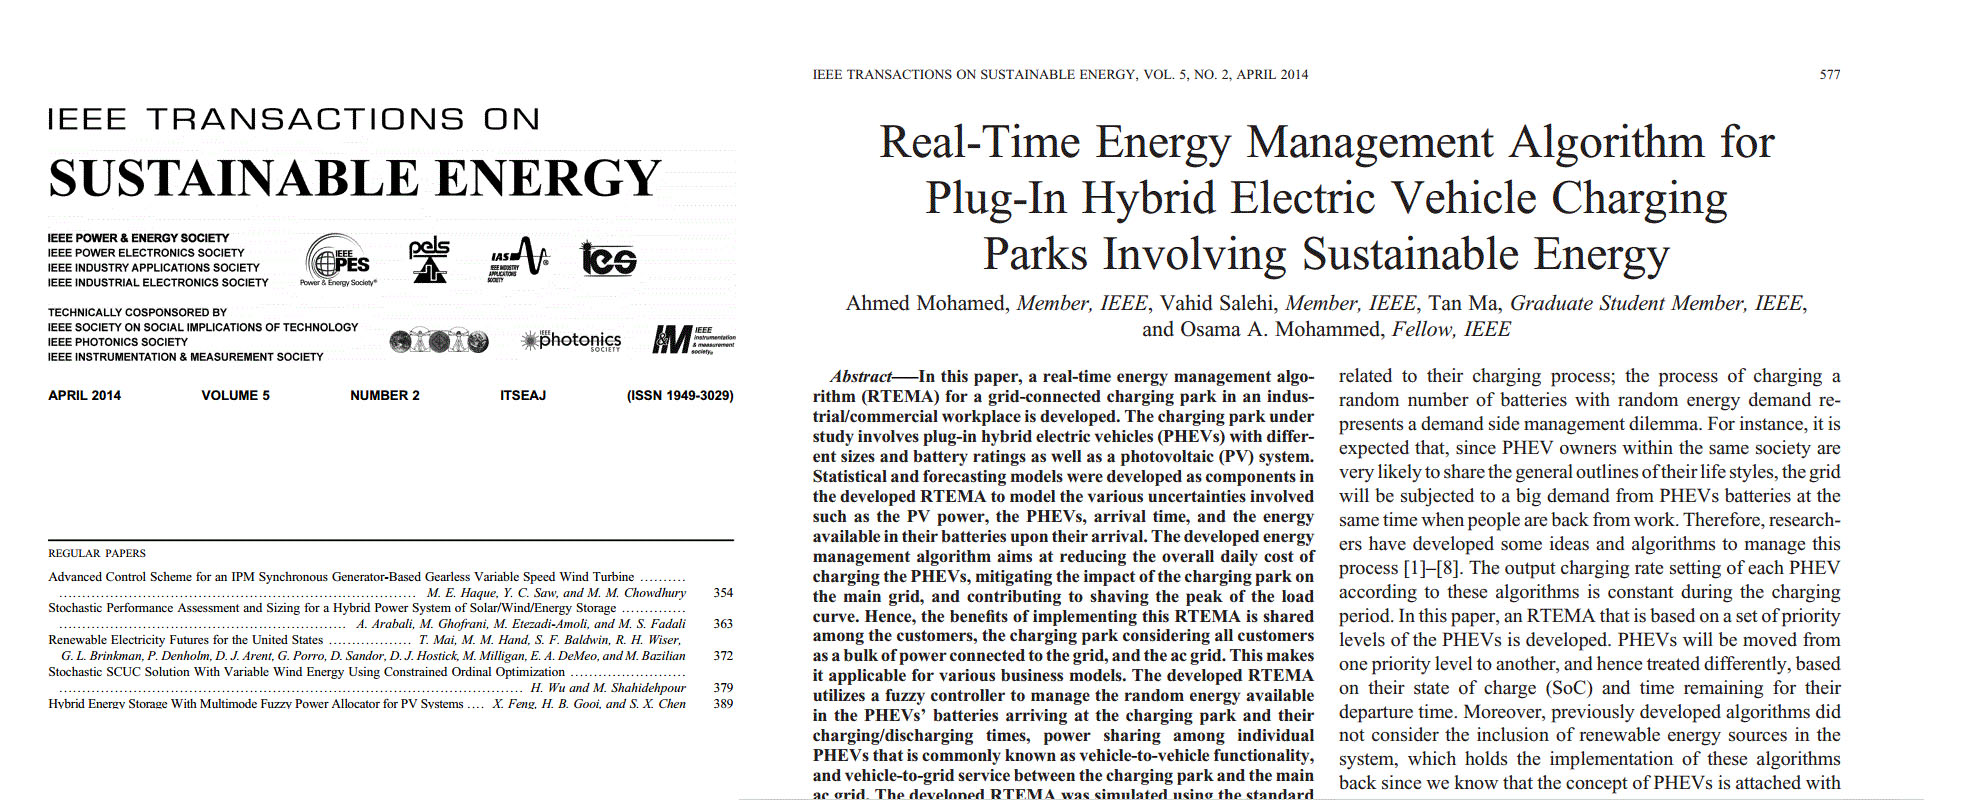 Real-Time Energy Management Algorithm for Plug-In Hybrid Electric Vehicle Charging Parks Involving Sustainable Energy